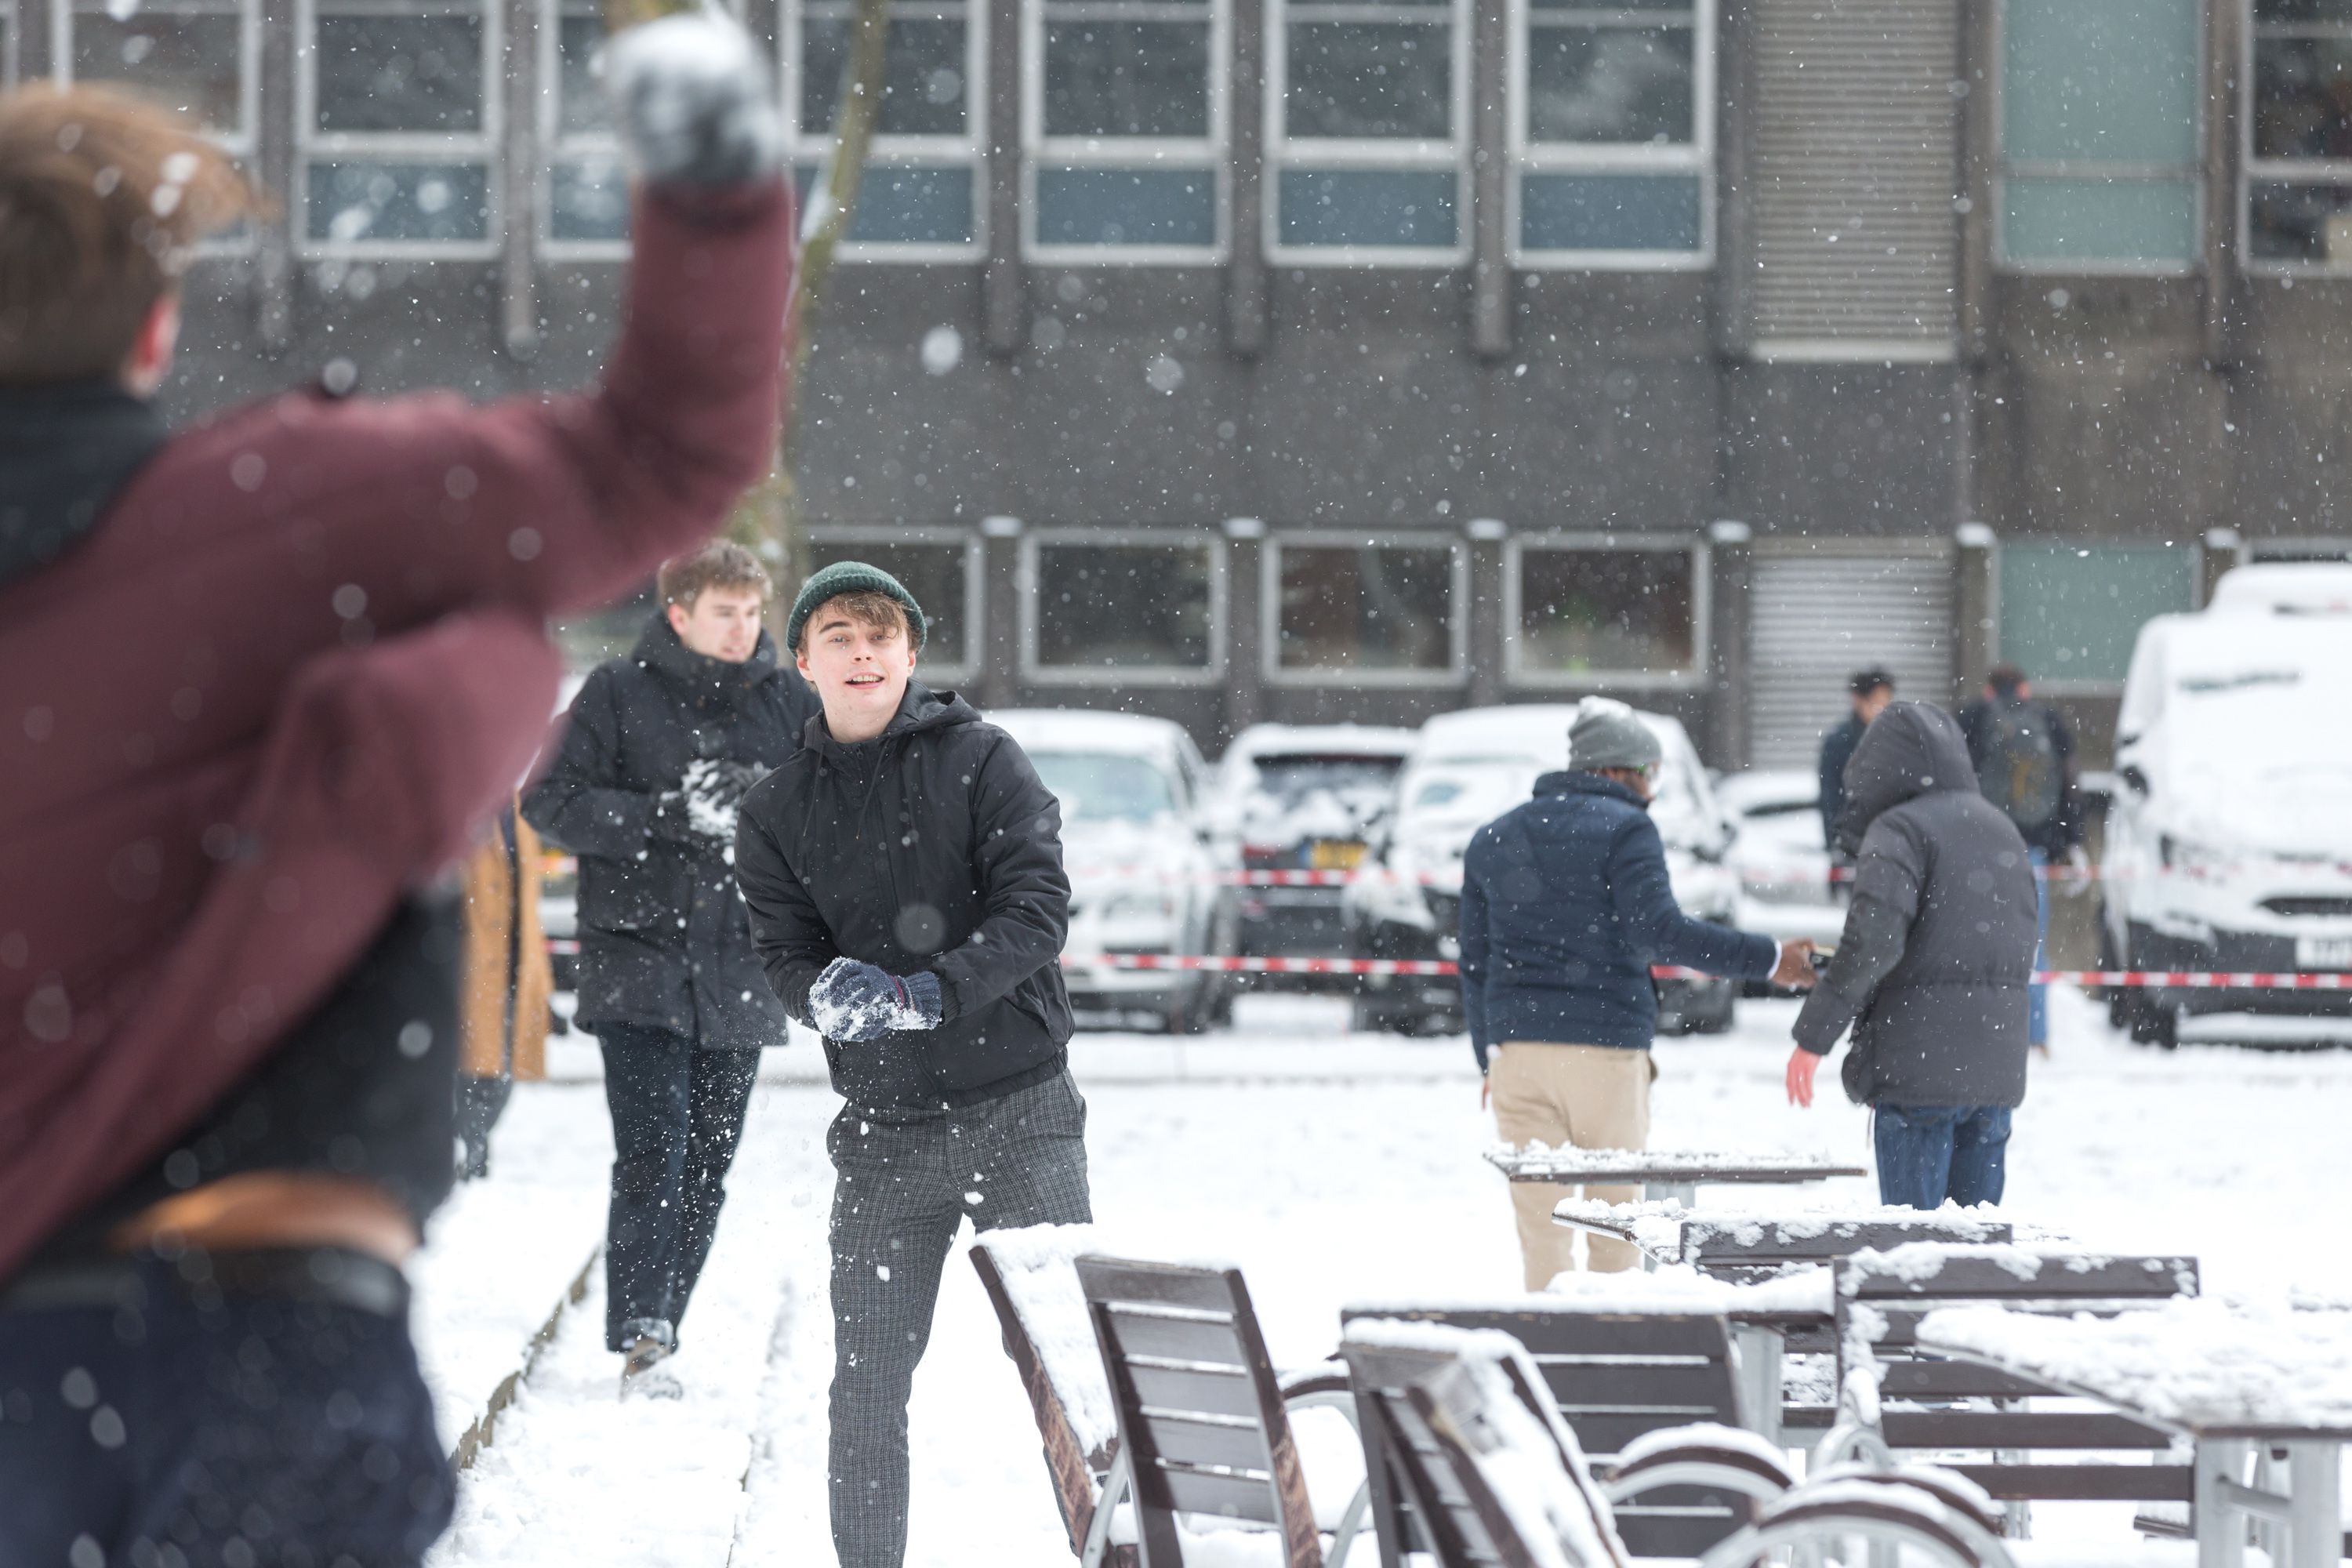 Students having a snowball fight on the South Kensington Campus